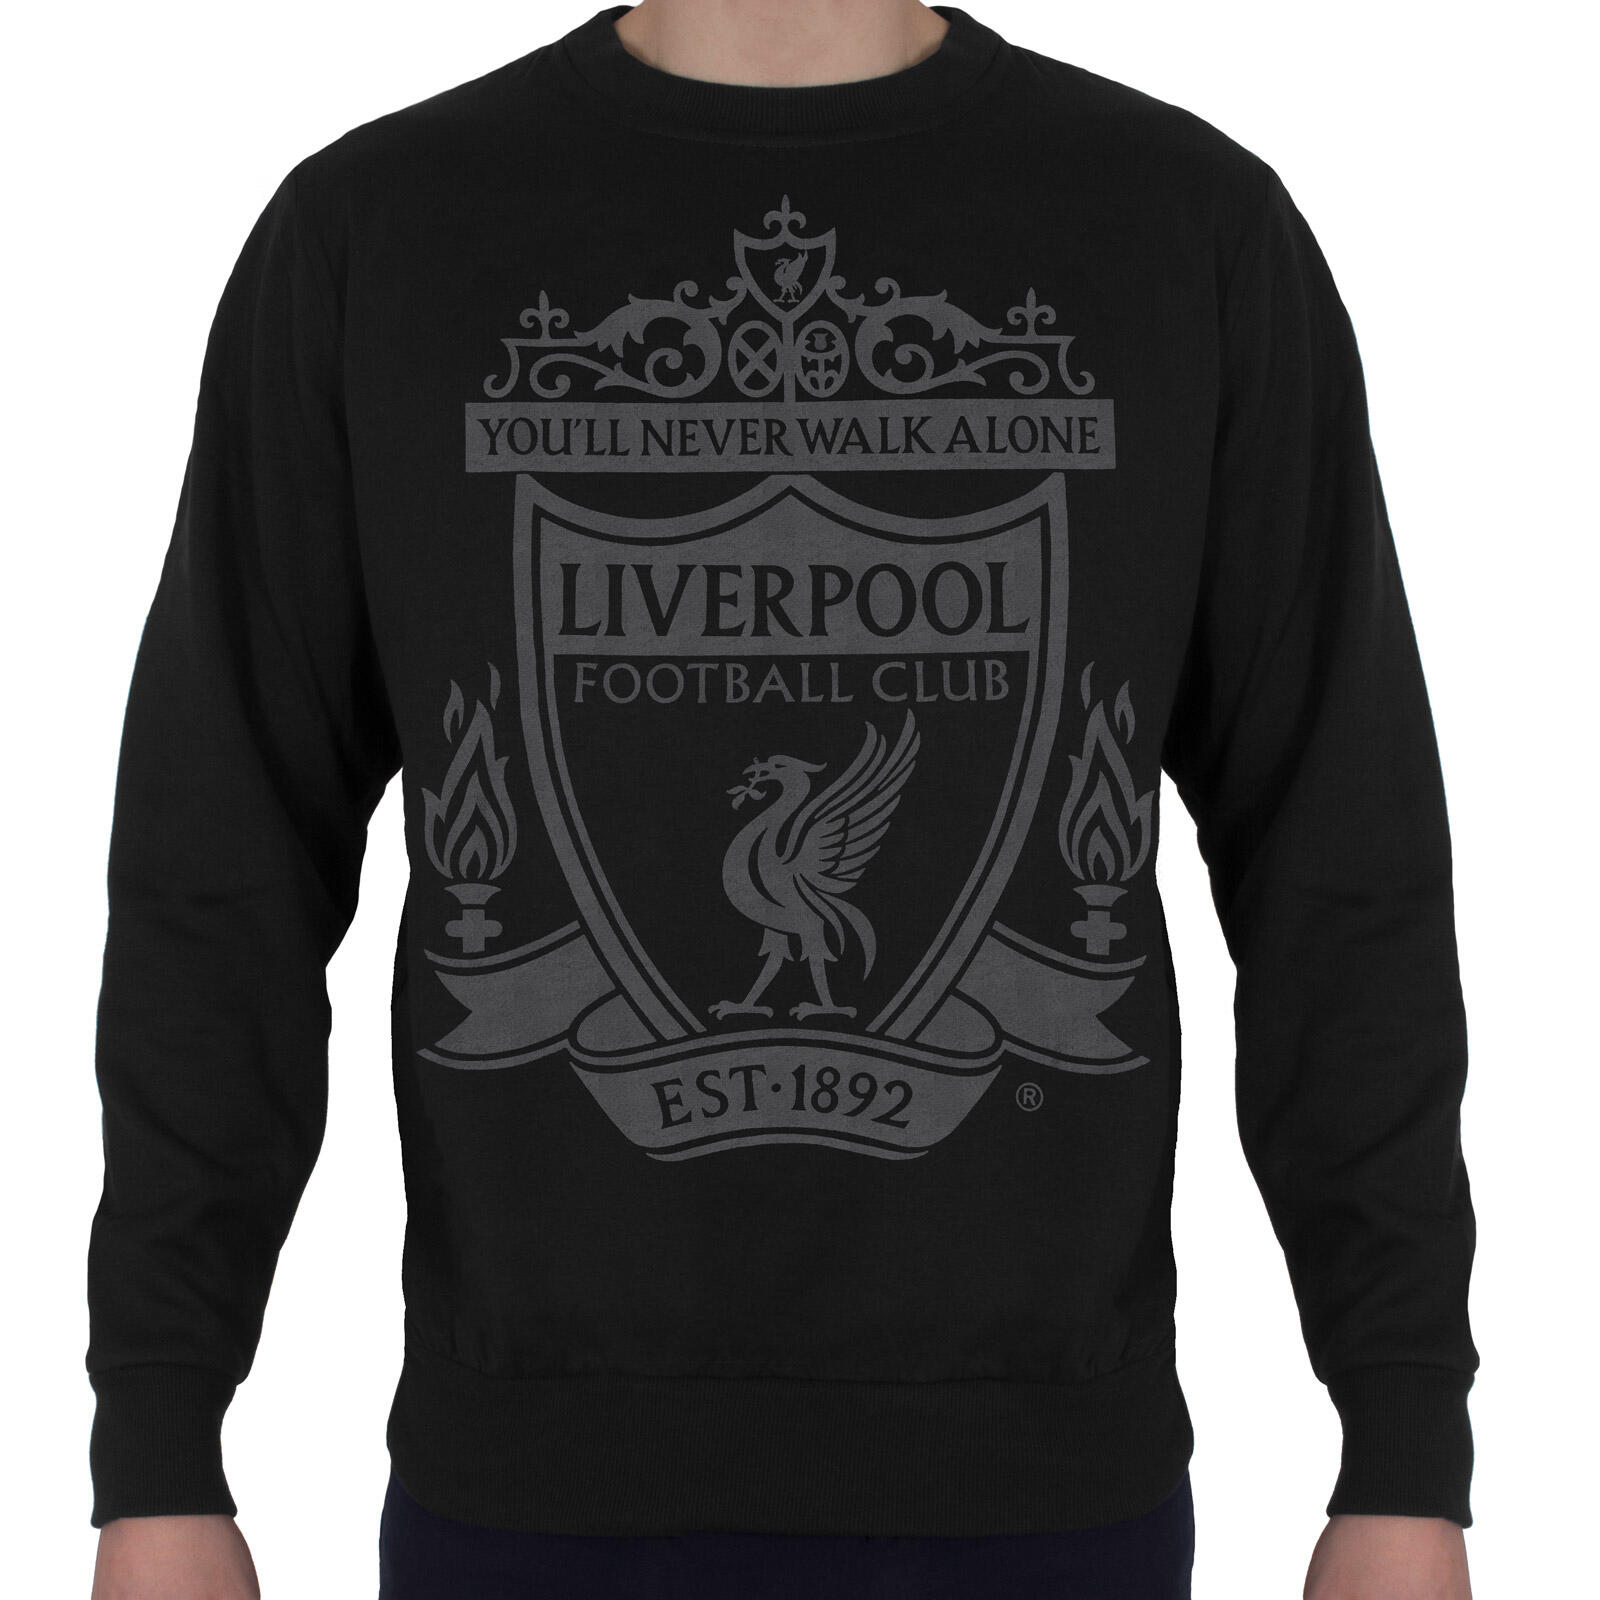 LIVERPOOL FC Liverpool FC Mens Sweatshirt Graphic Top OFFICIAL Football Gift